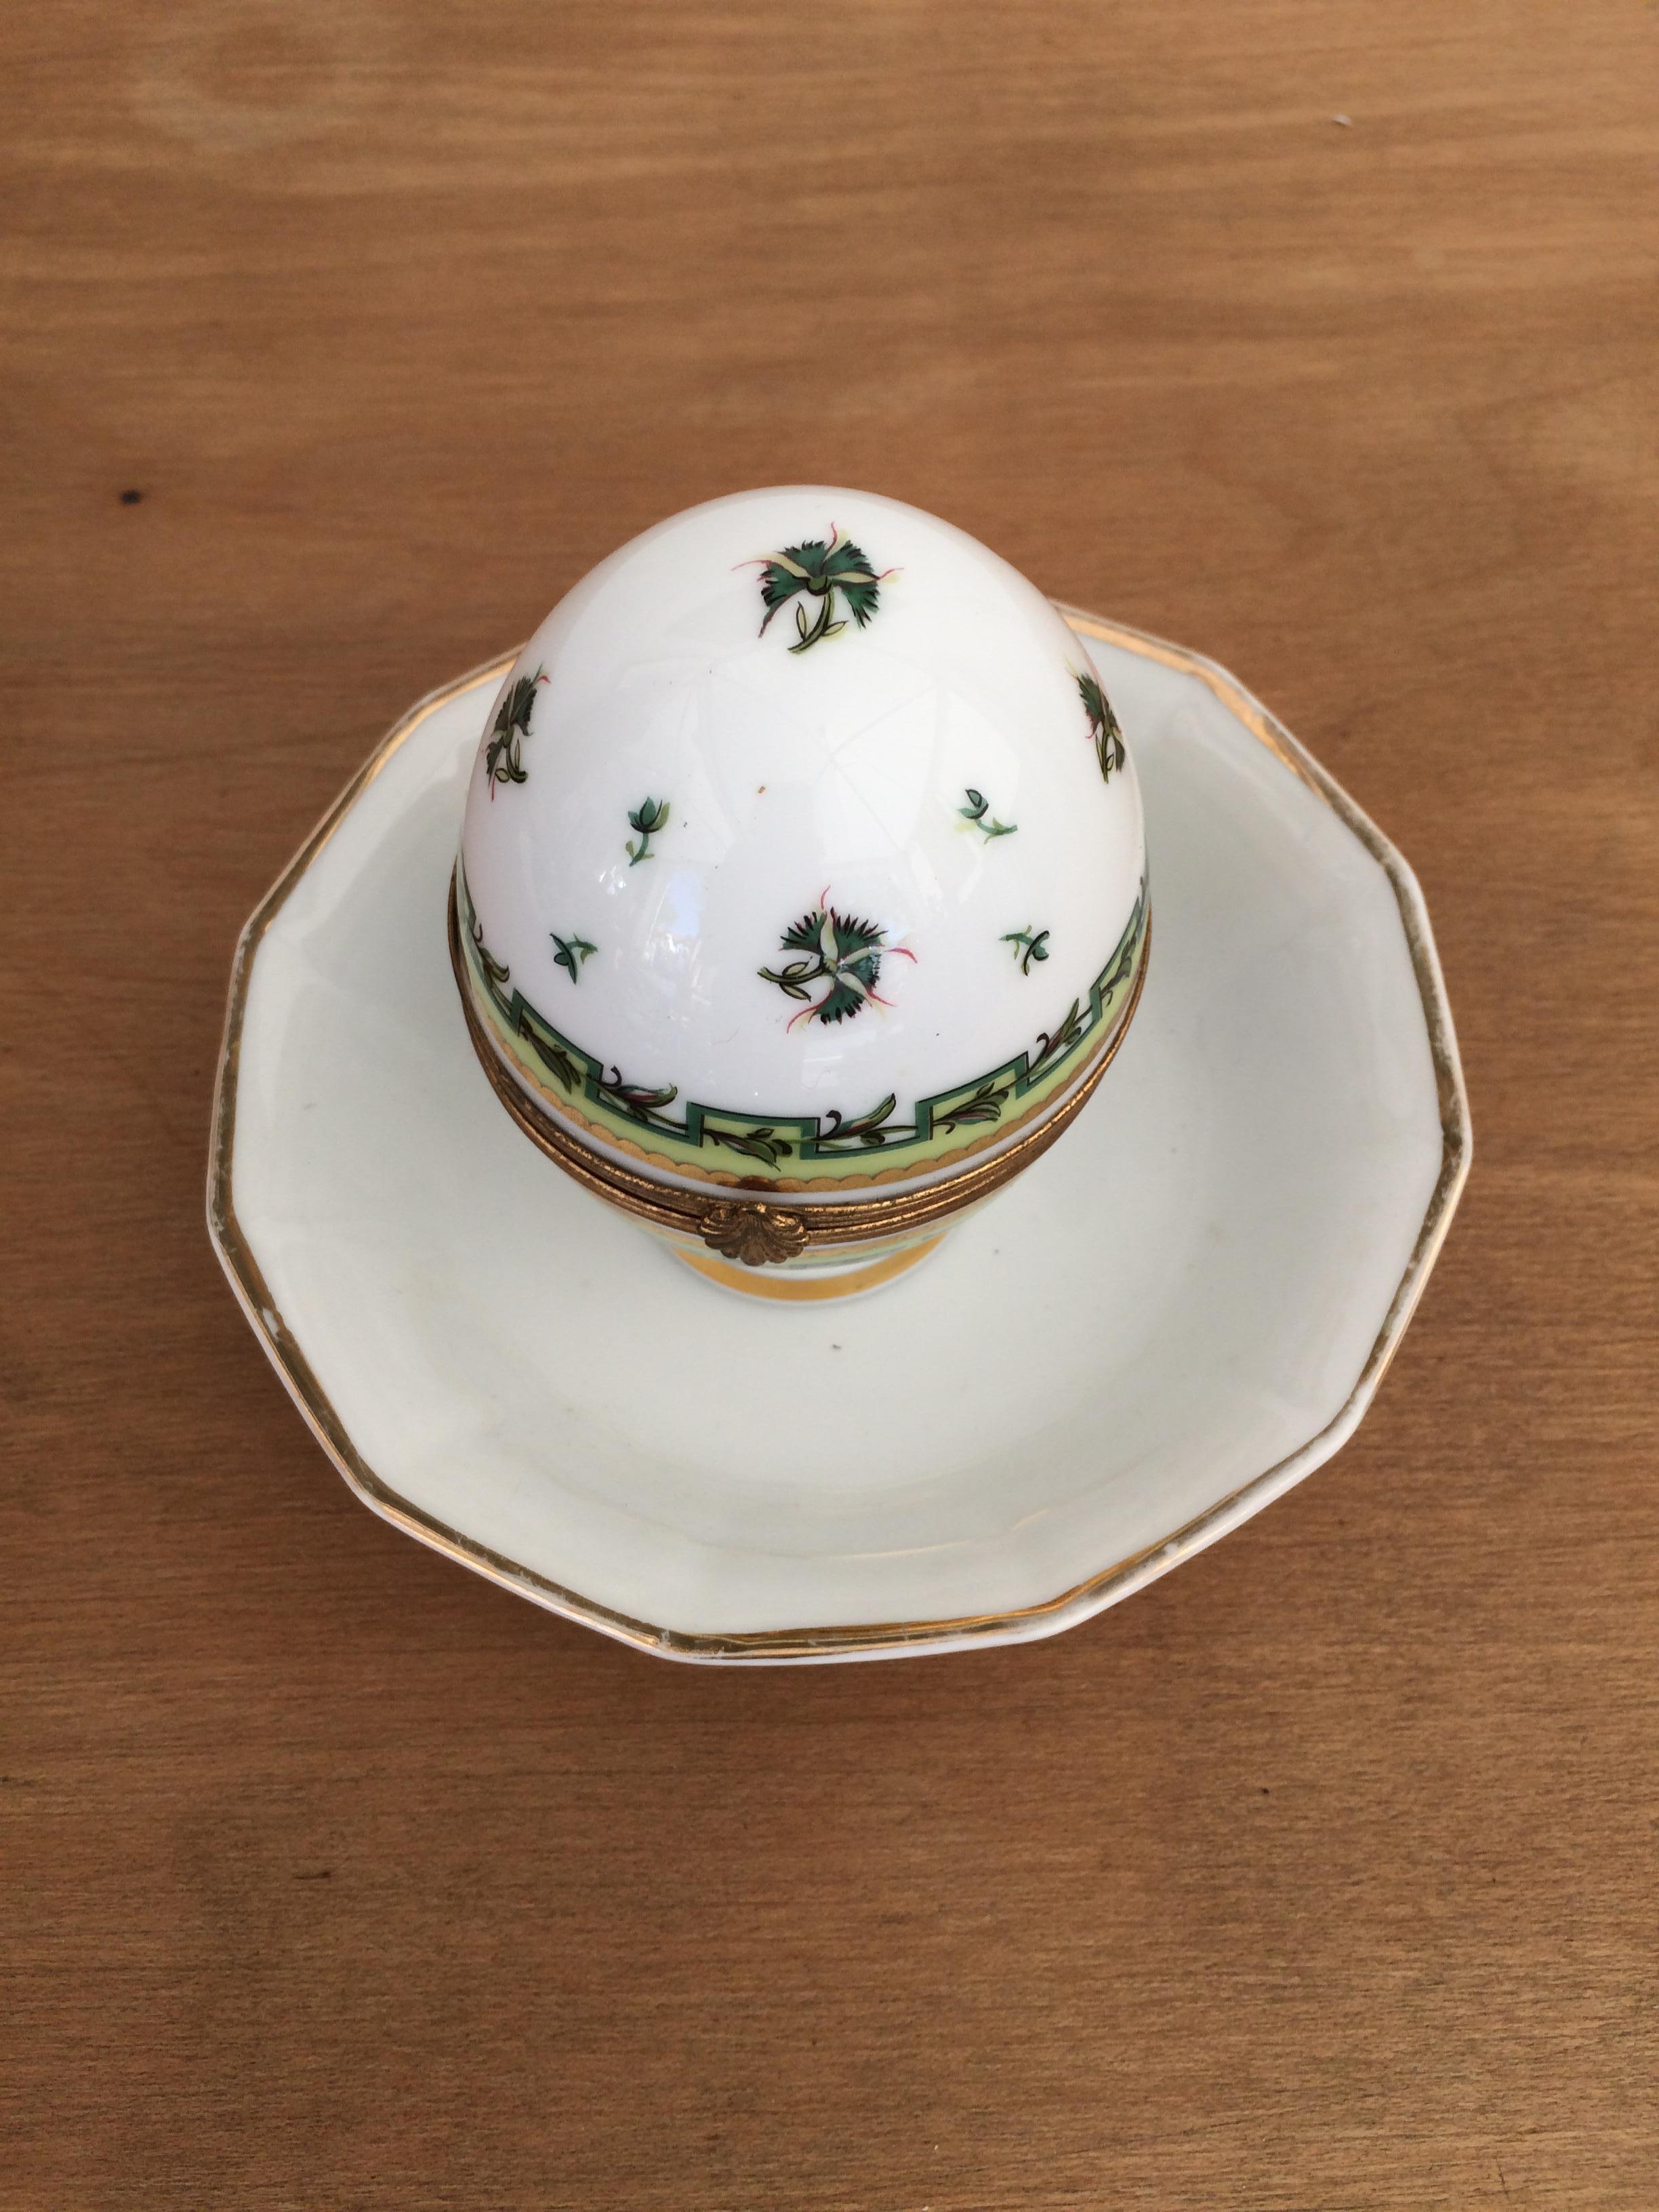 This French limoges porcelain trinket box is a delicate egg shape with a floral decorated closure. It is charmingly hand painted with on a solid white background. The interior hinges opens to reveal the word Bougainville which is also hand painted.